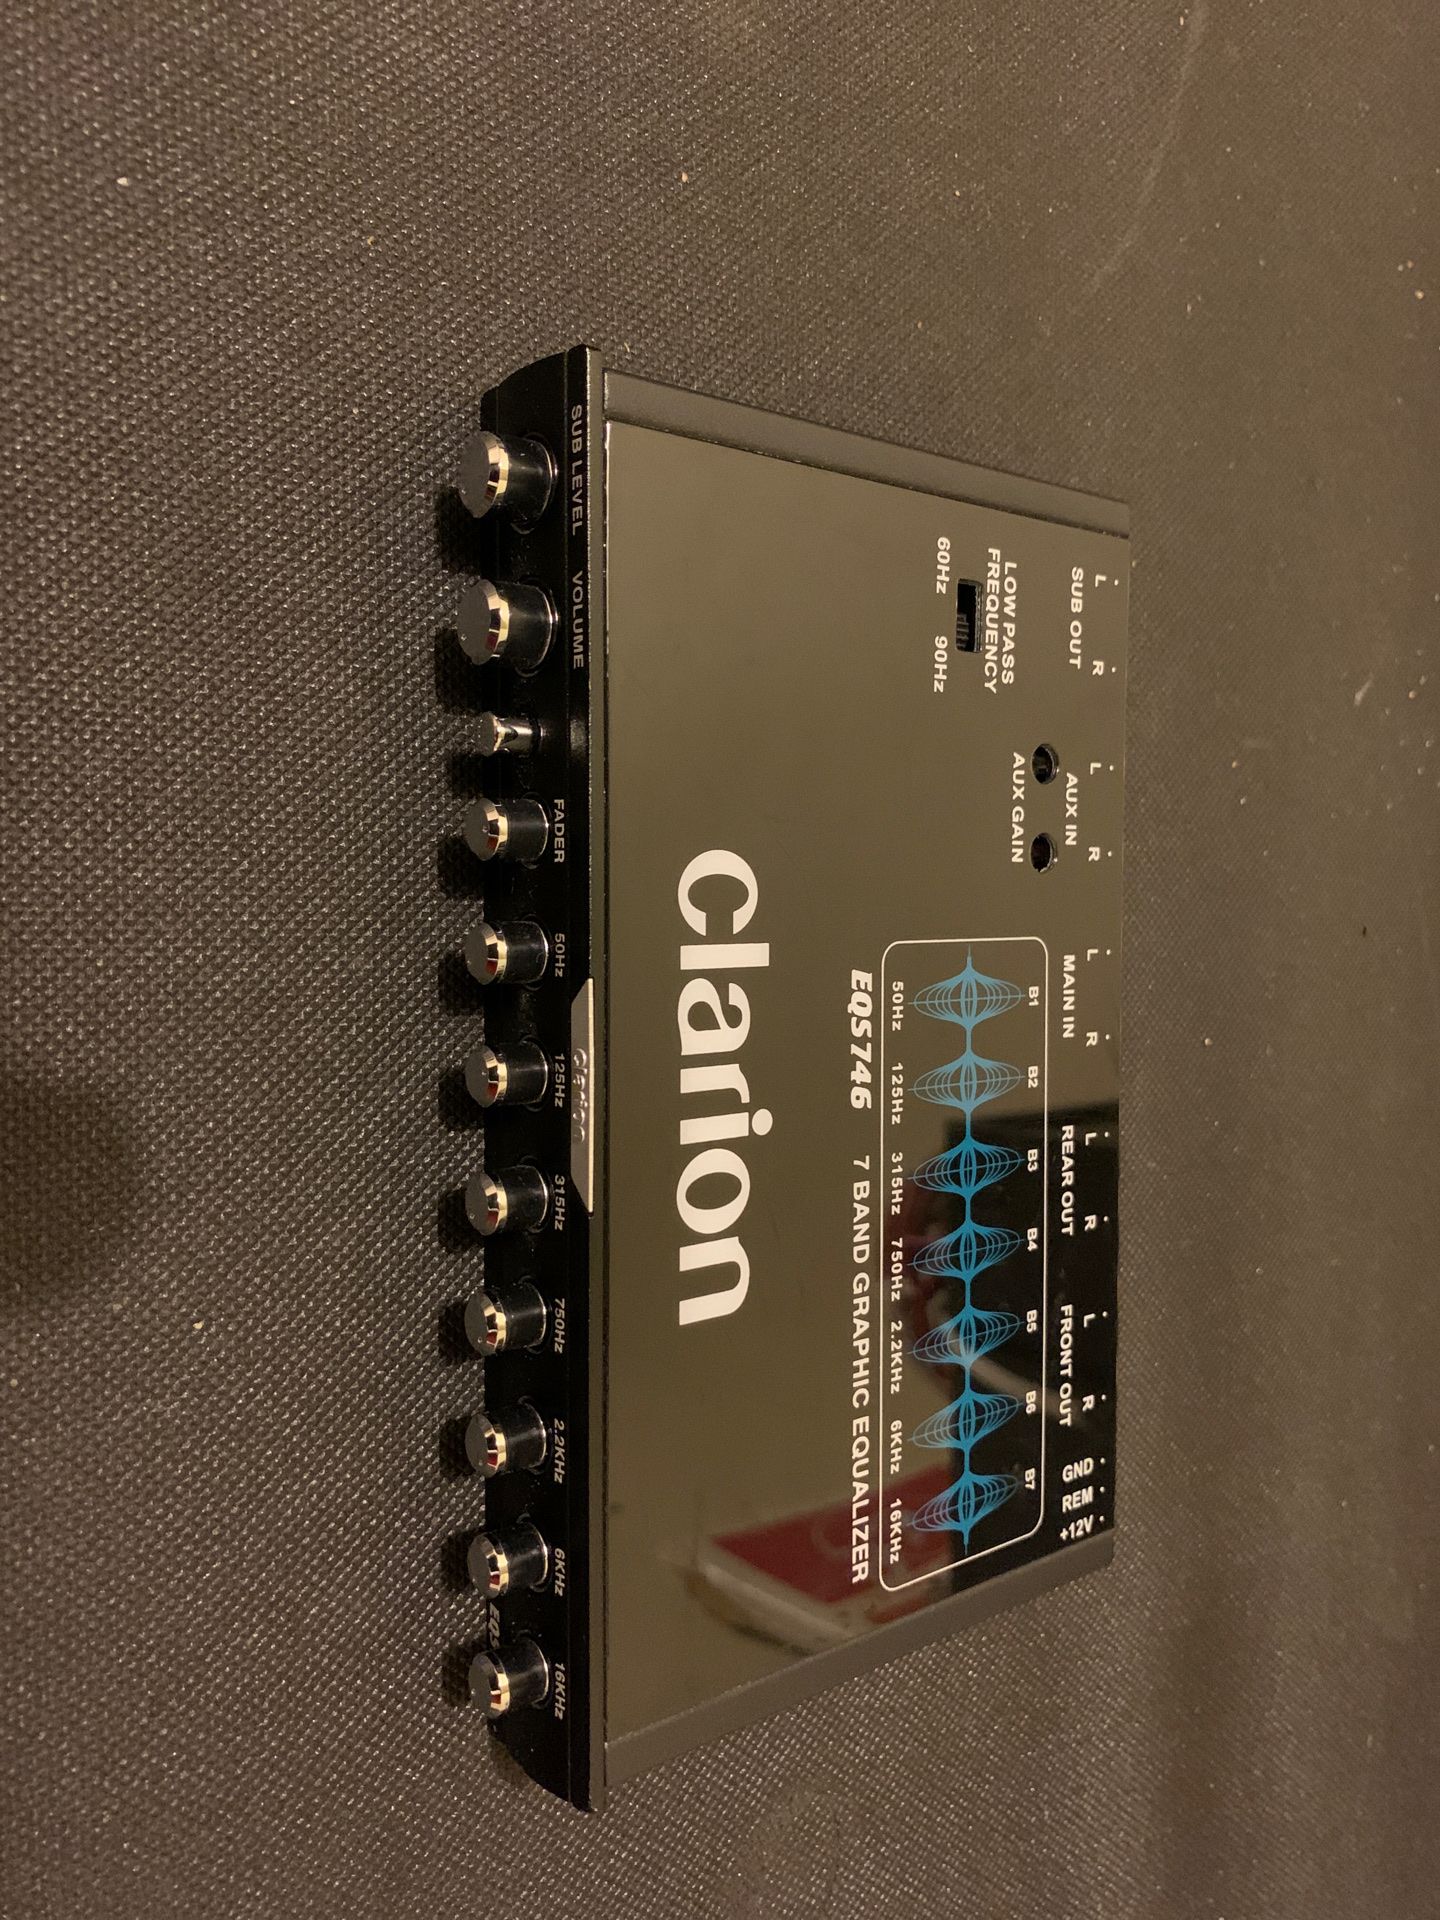 Clarion 7-band graphic equalizer